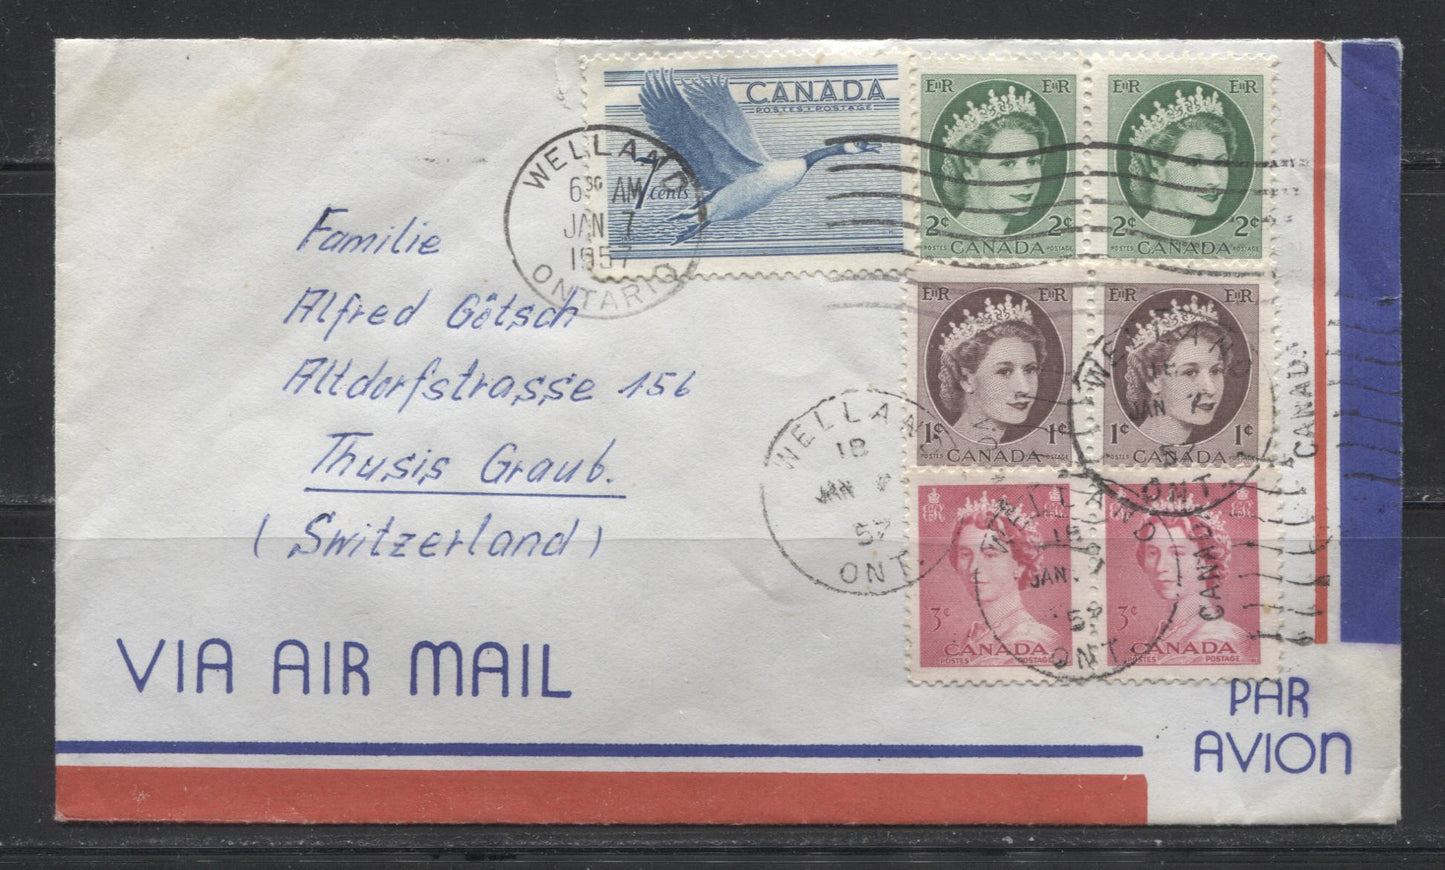 Canada #320/338 7c Grey Blue - 2c Green Canada Goose & Queen Elizabeth II, 1952-53 Karsh Issue & 1954-62 Wilding Issue 1957 19c Overpaid Airmail Cover to Switzerland With Mixed Wilding-Karsh Franking